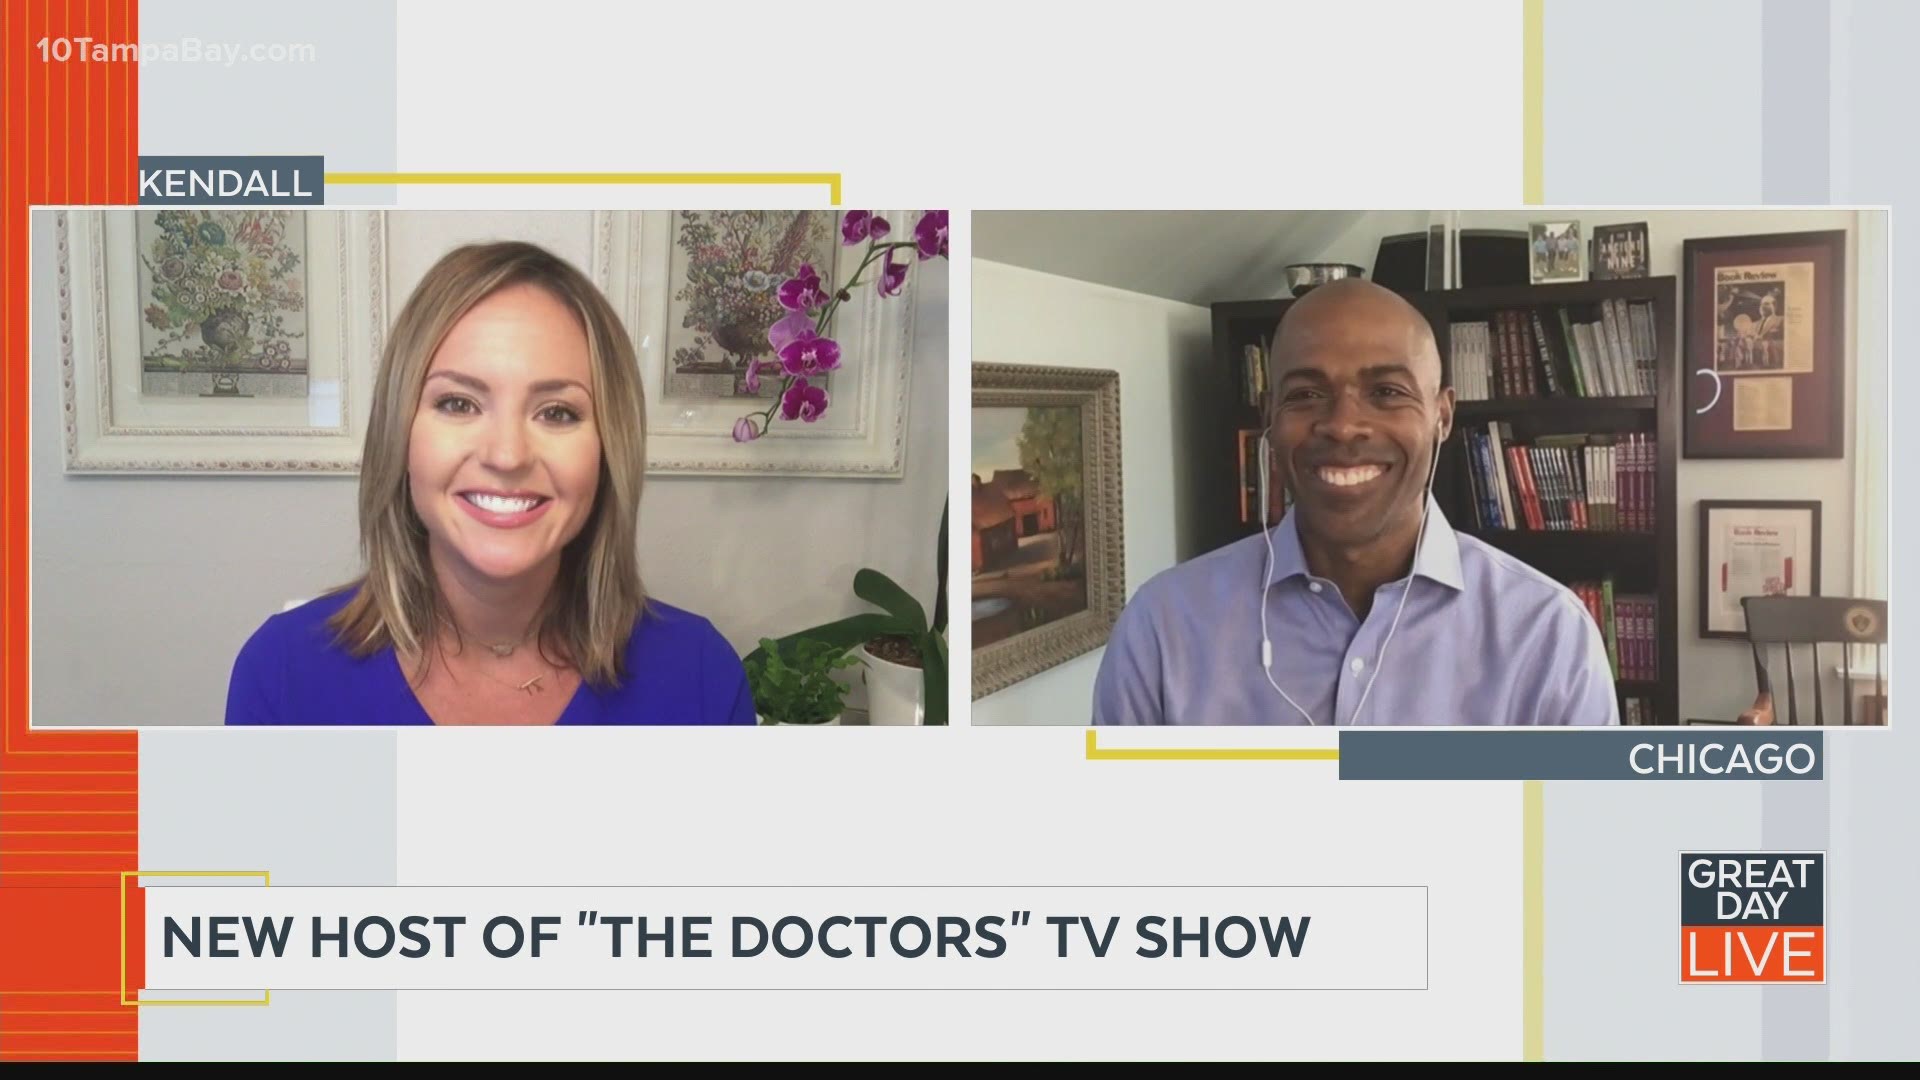 Dr. Ian joined GDL to talk about being chosen as the new host of “The Doctors.” The show premieres Sept. 21.